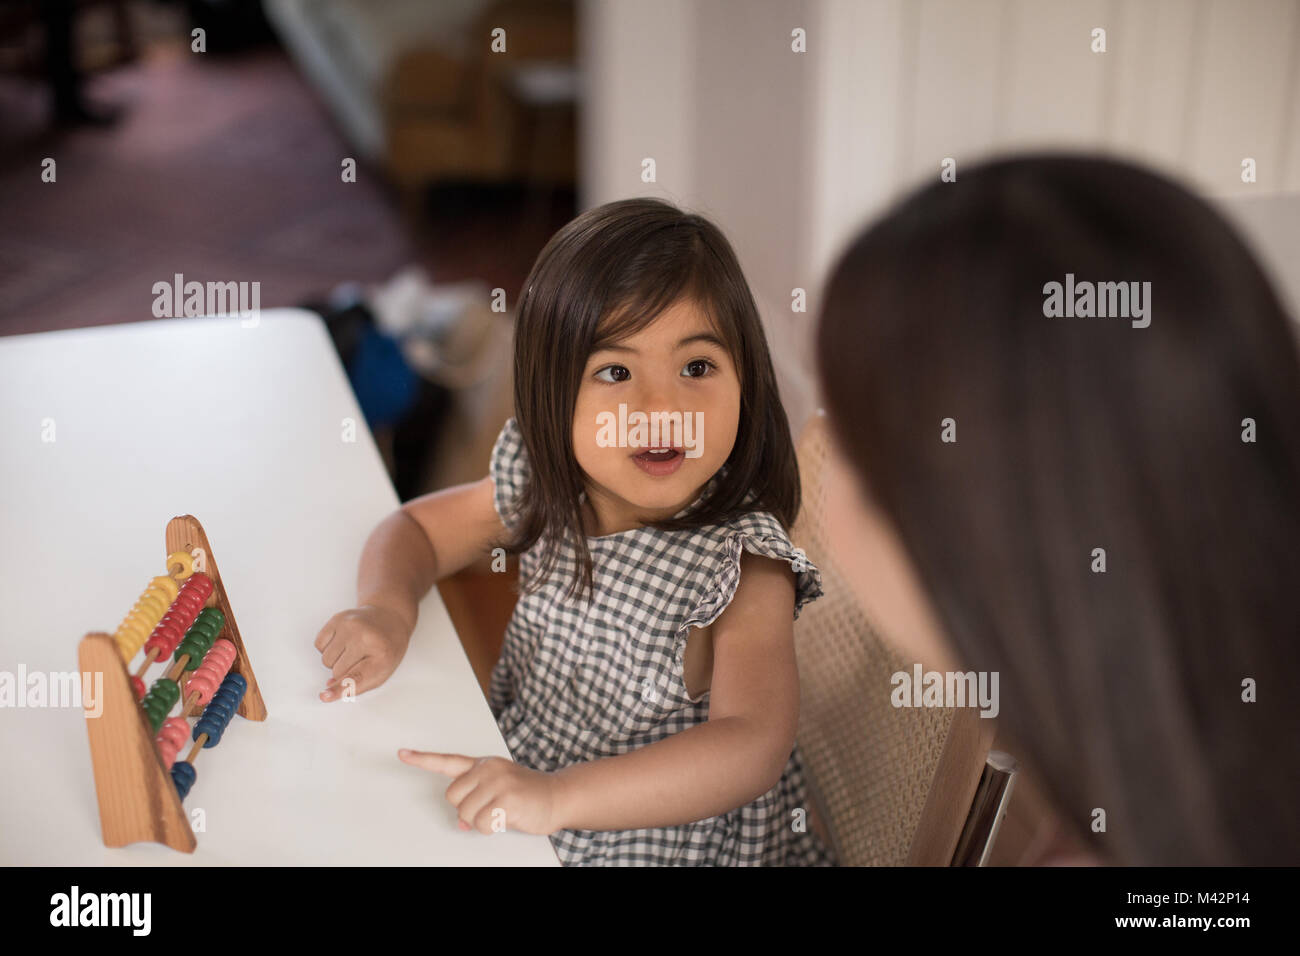 Girl using abacus to count with Mother Stock Photo